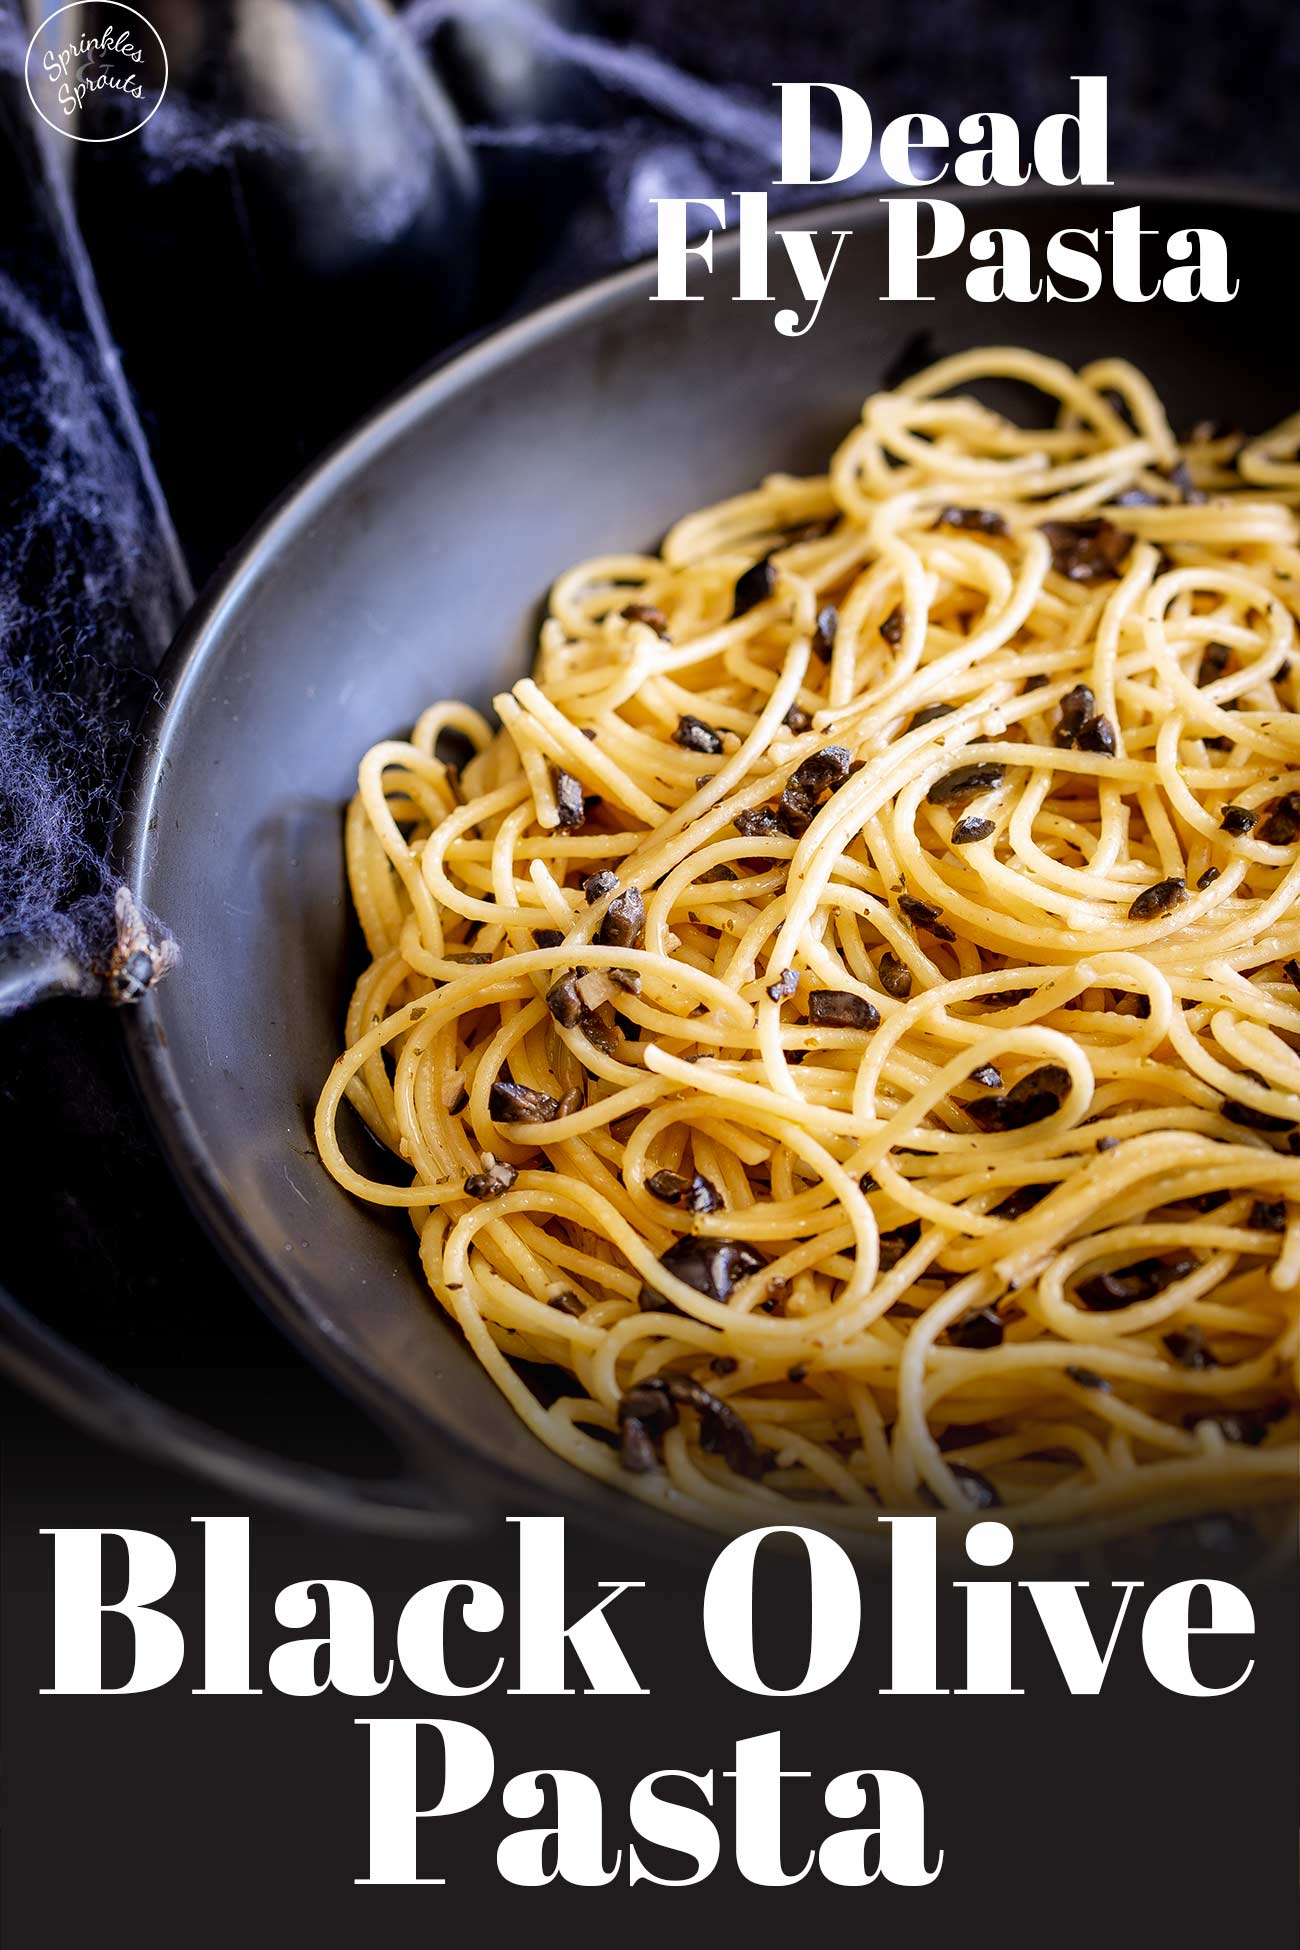 PINTEREST IMAGE: Black olive Pasta with text overlay